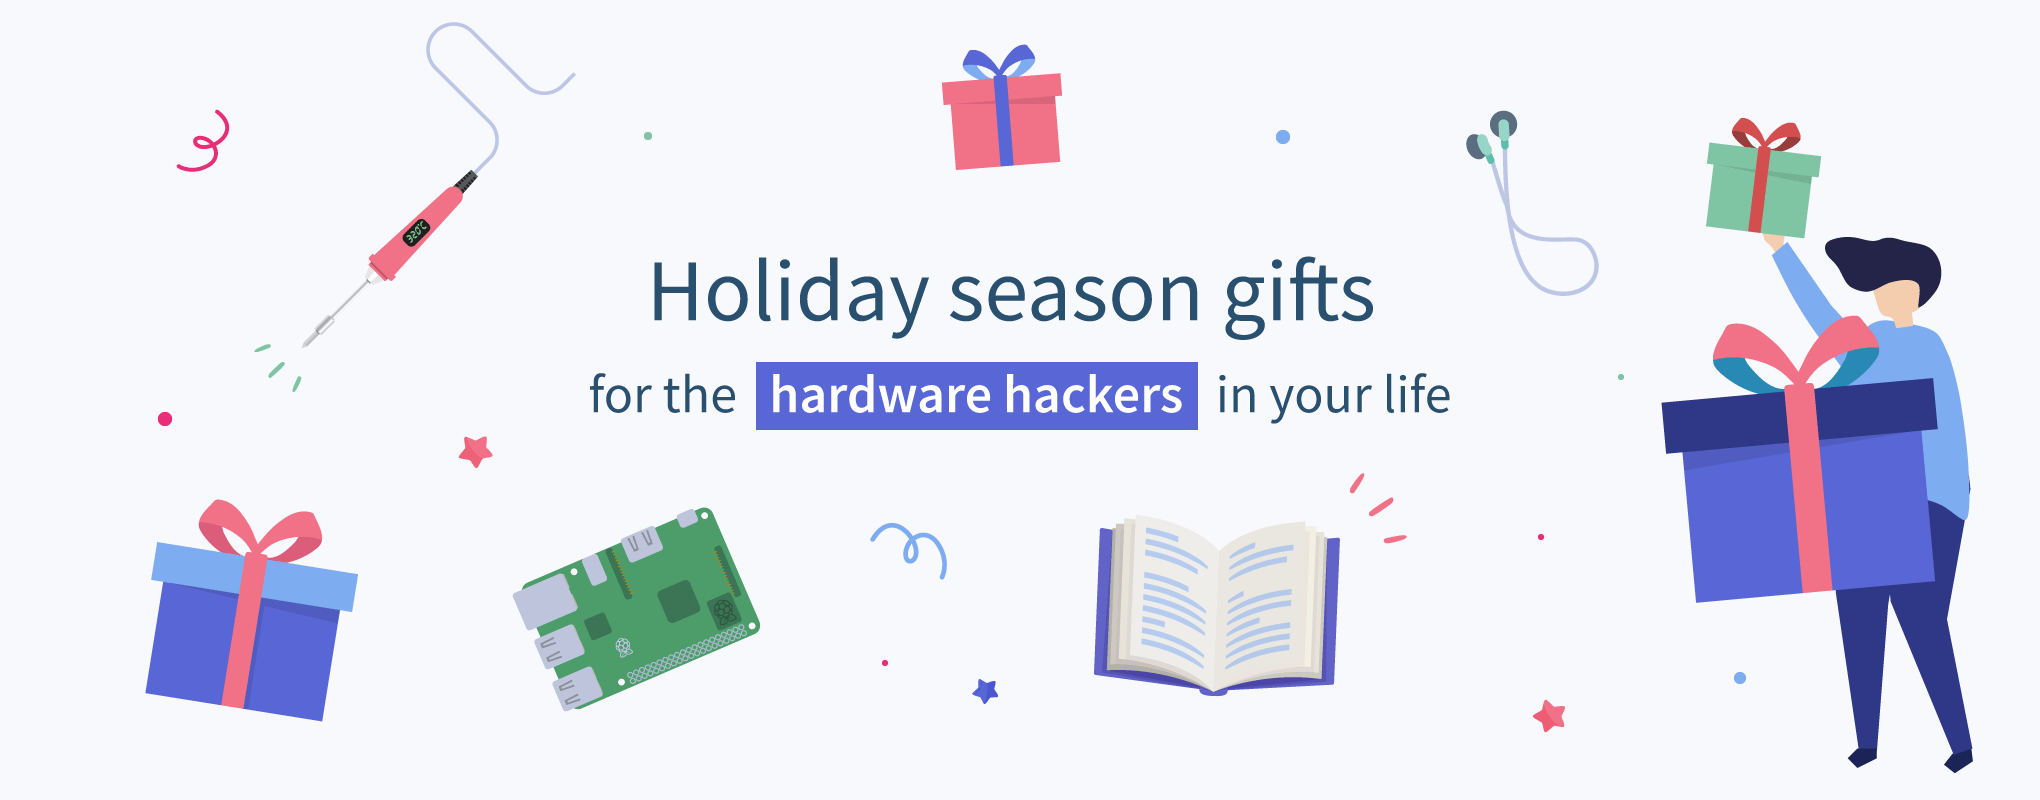 Holiday gift suggestions for the hardware hackers in your life – 2021 edition